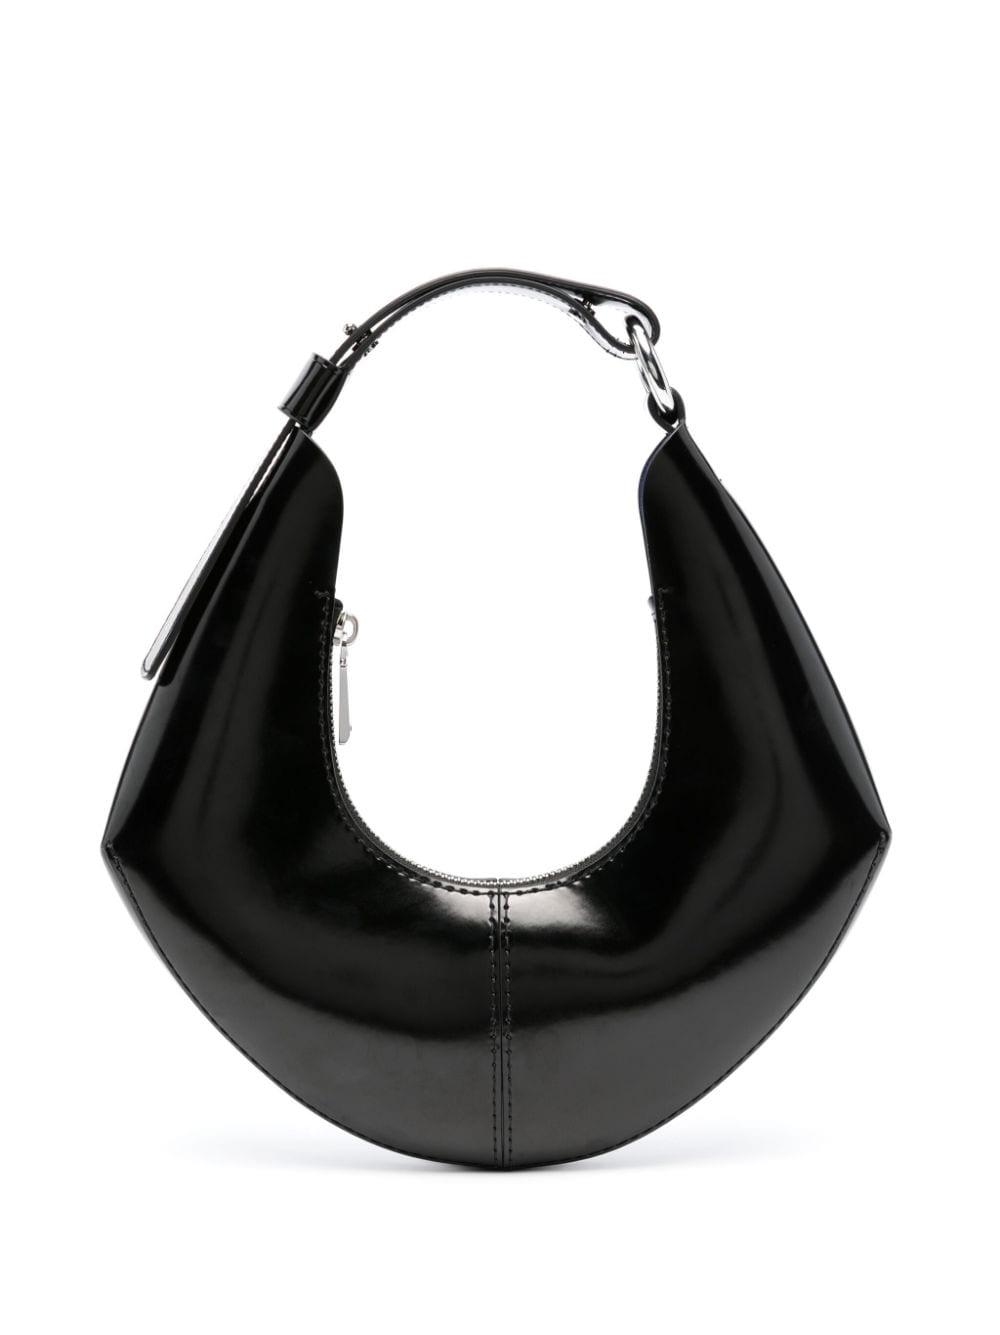 PROENZA SCHOULER WHITE LABEL Small Chrystie Leather Shoulder Bag in Black